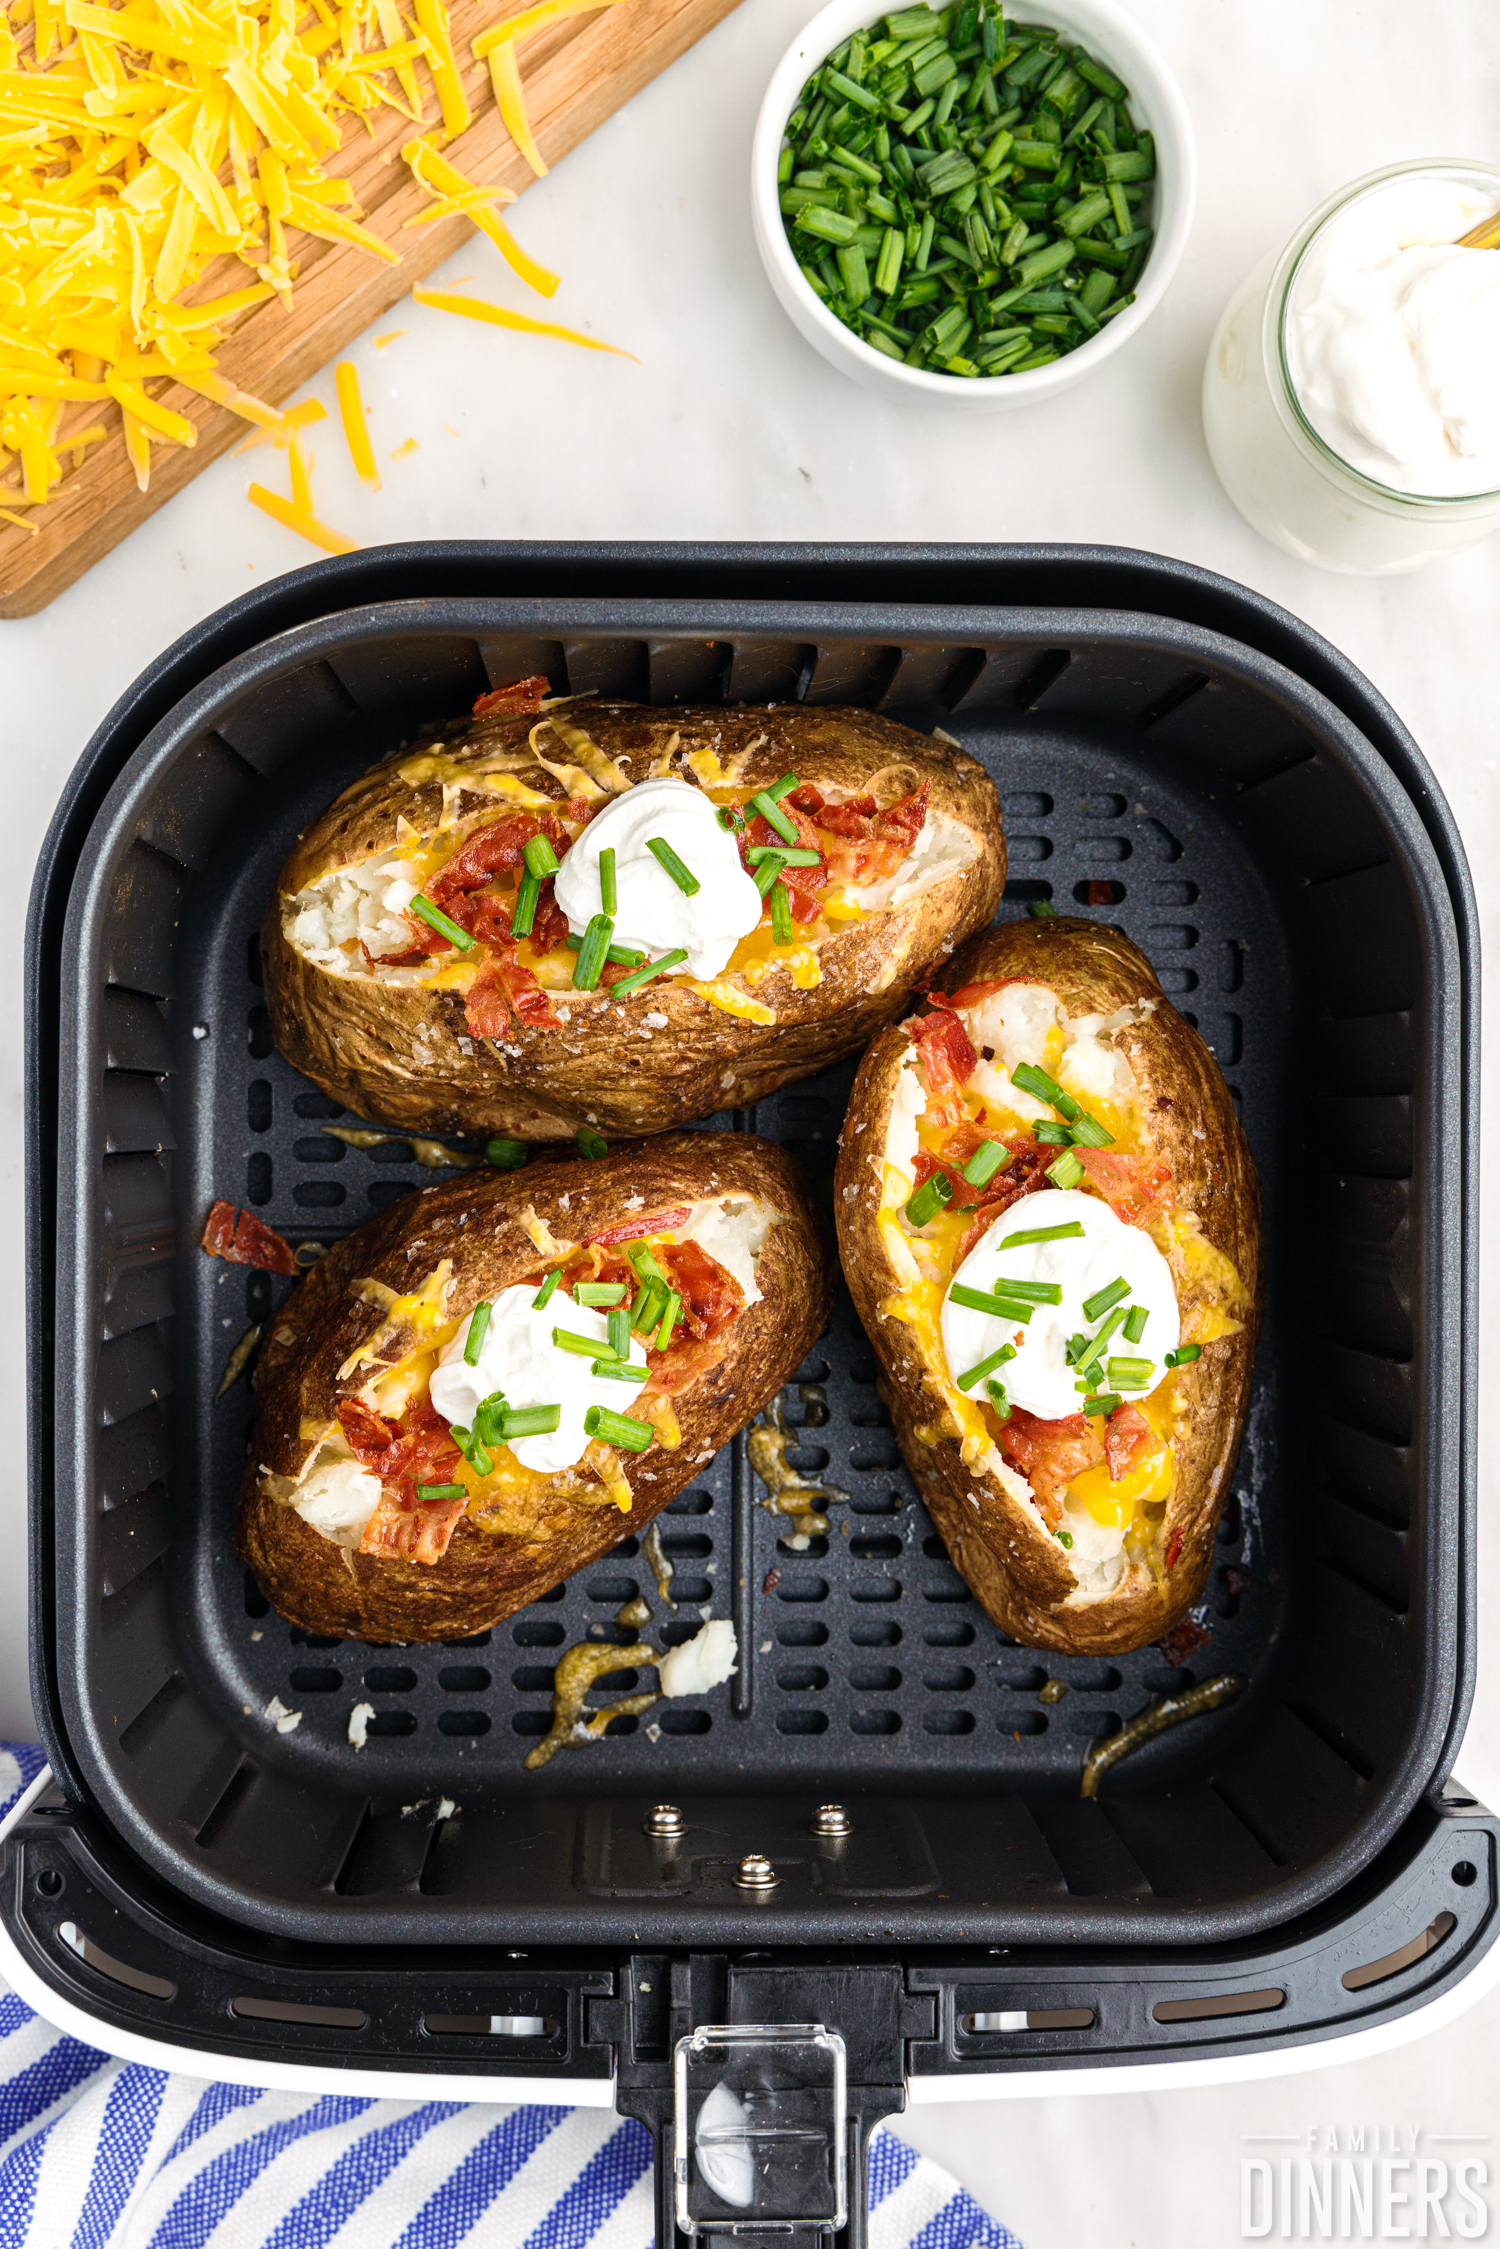 Baked potatoes in air fryer basket loaded with toppings like cheddar cheese, bacon bits, sour cream and green onion pieces.